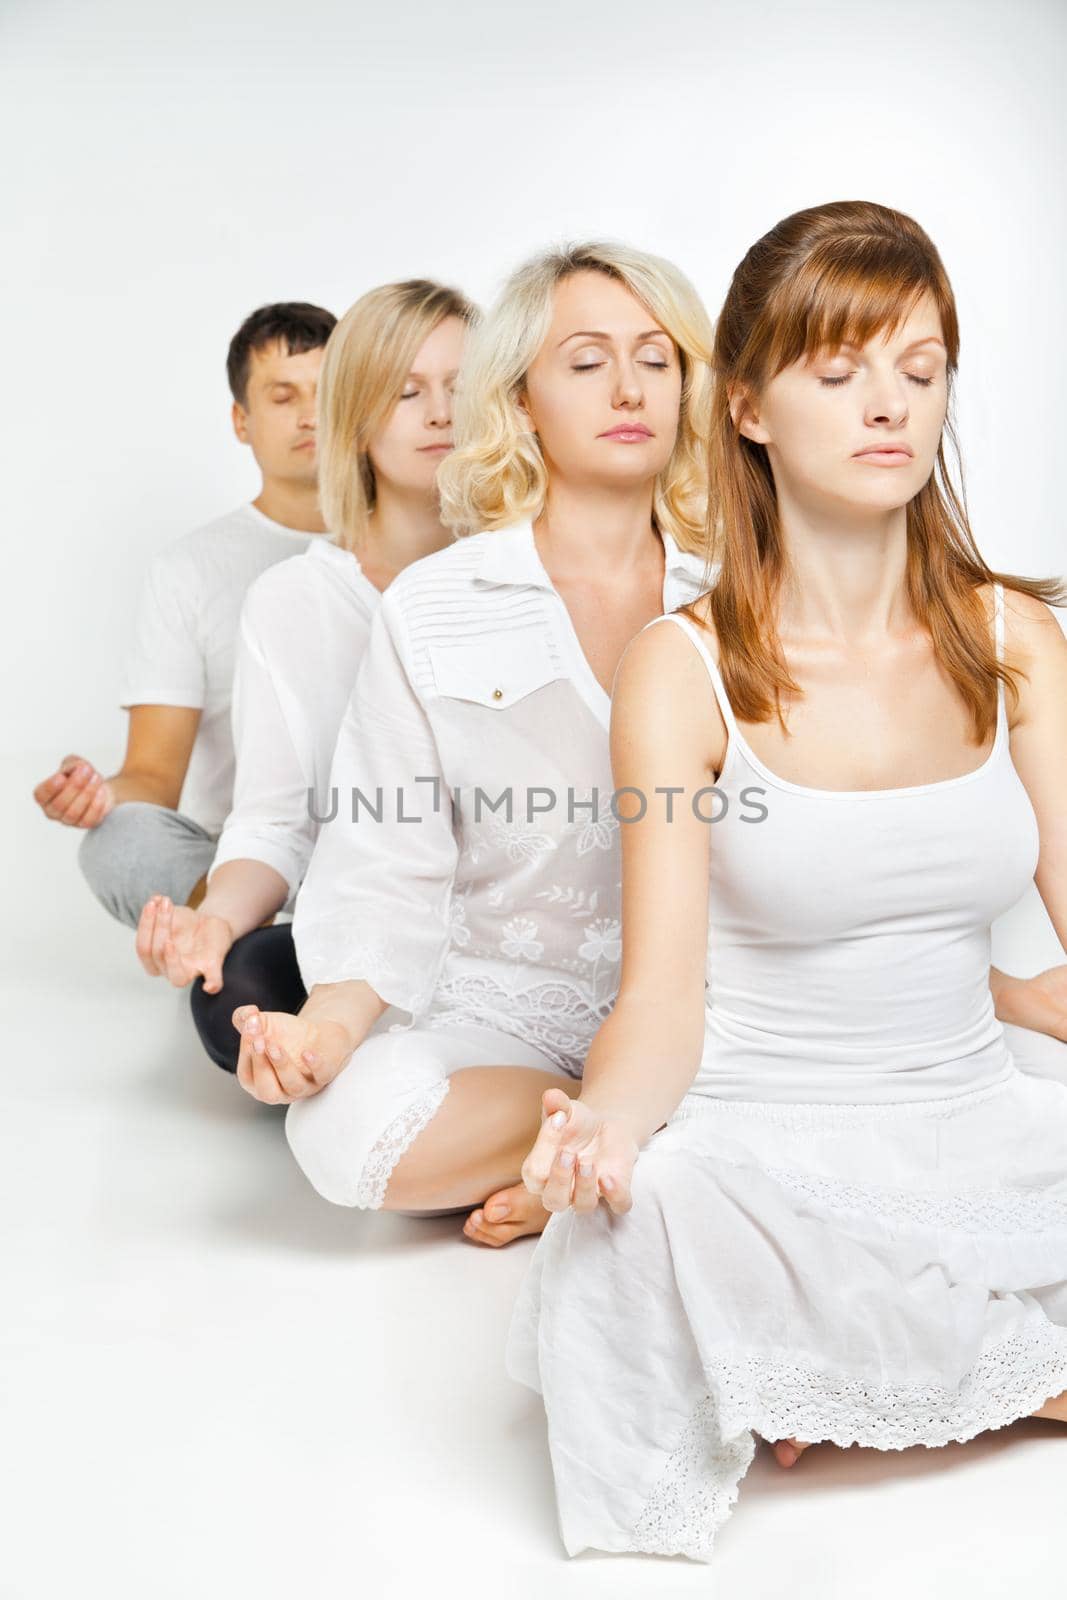 Group of people relaxing and doing yoga in white studio